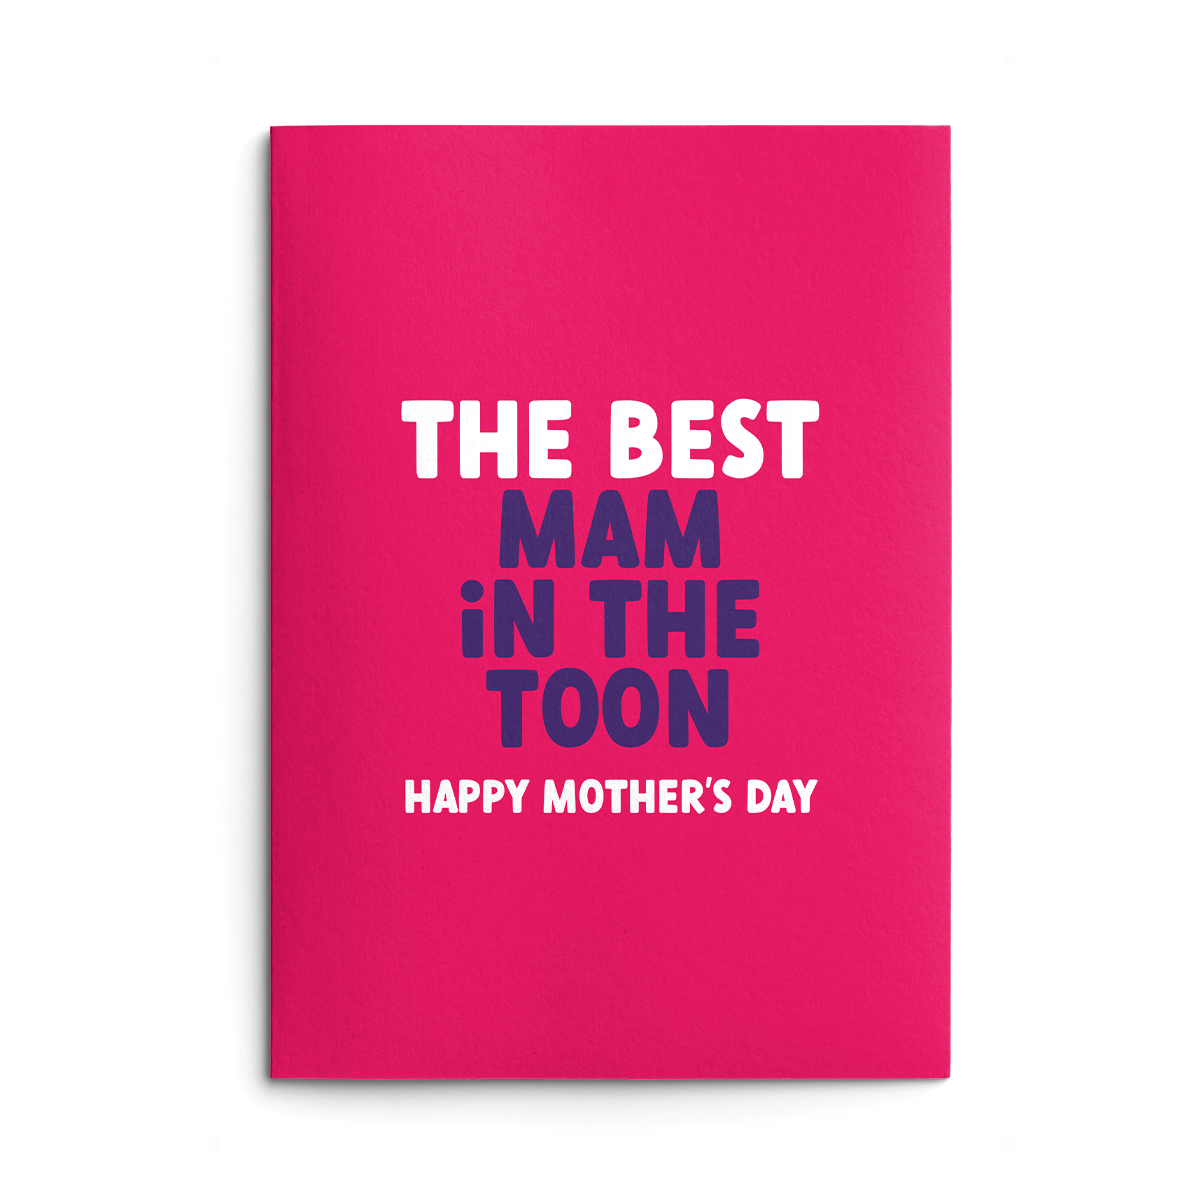 Mam Mother's Day Card text reads "The Best Mam in the Toon. Happy Mother's Day"